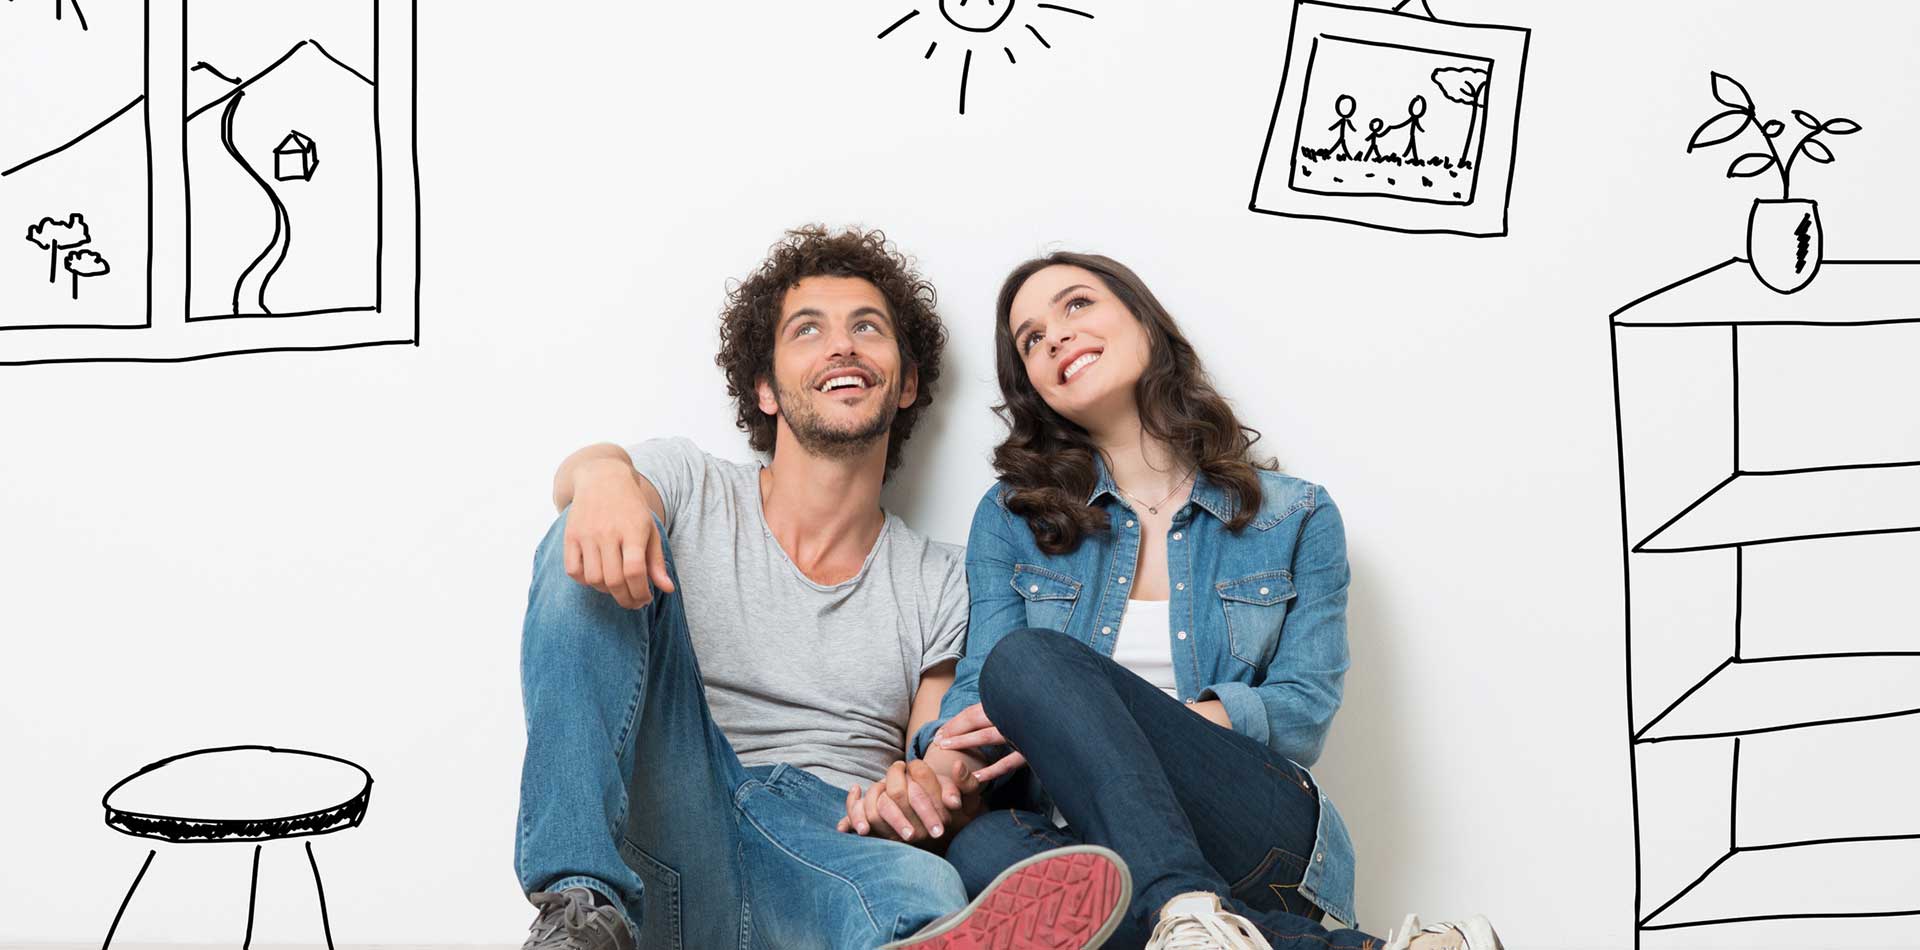 young couple on floor with dreamy looks and sketched furniture around them.